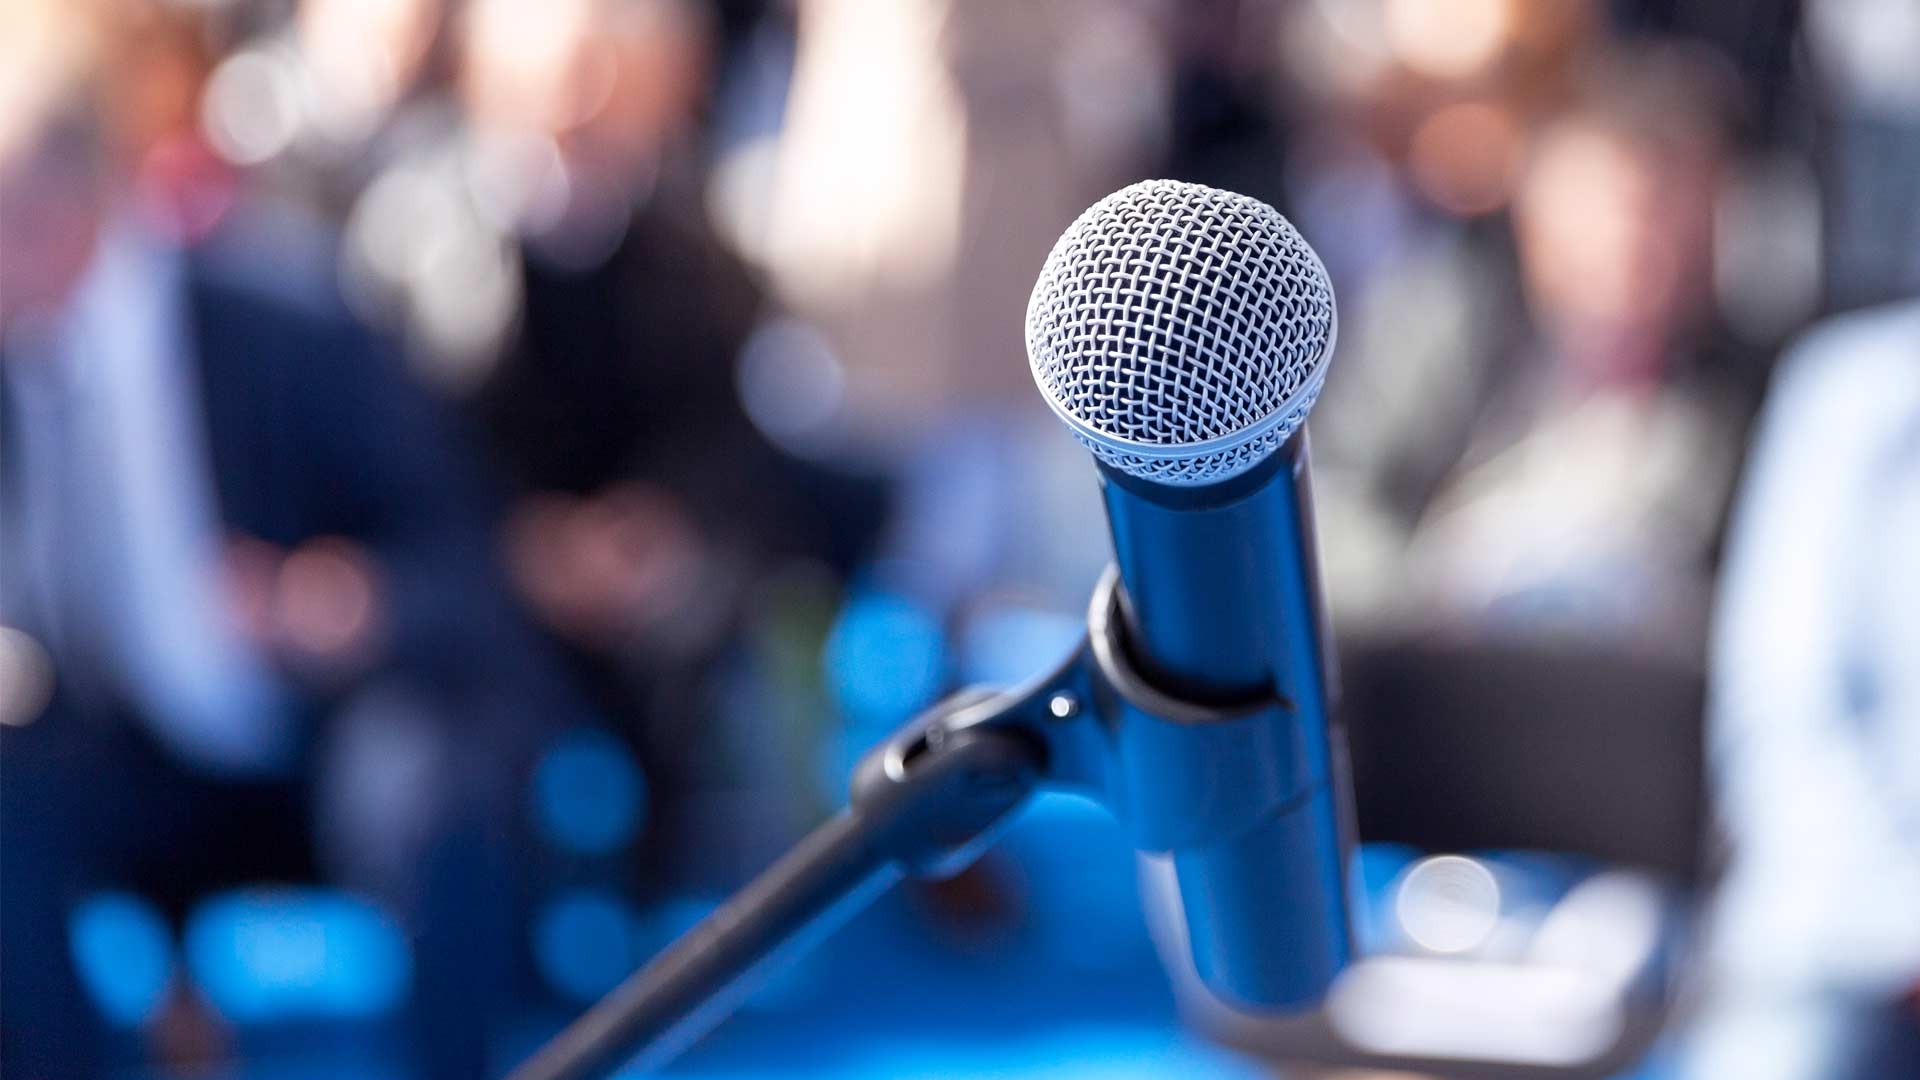 Microphone set up for a public speaking event.